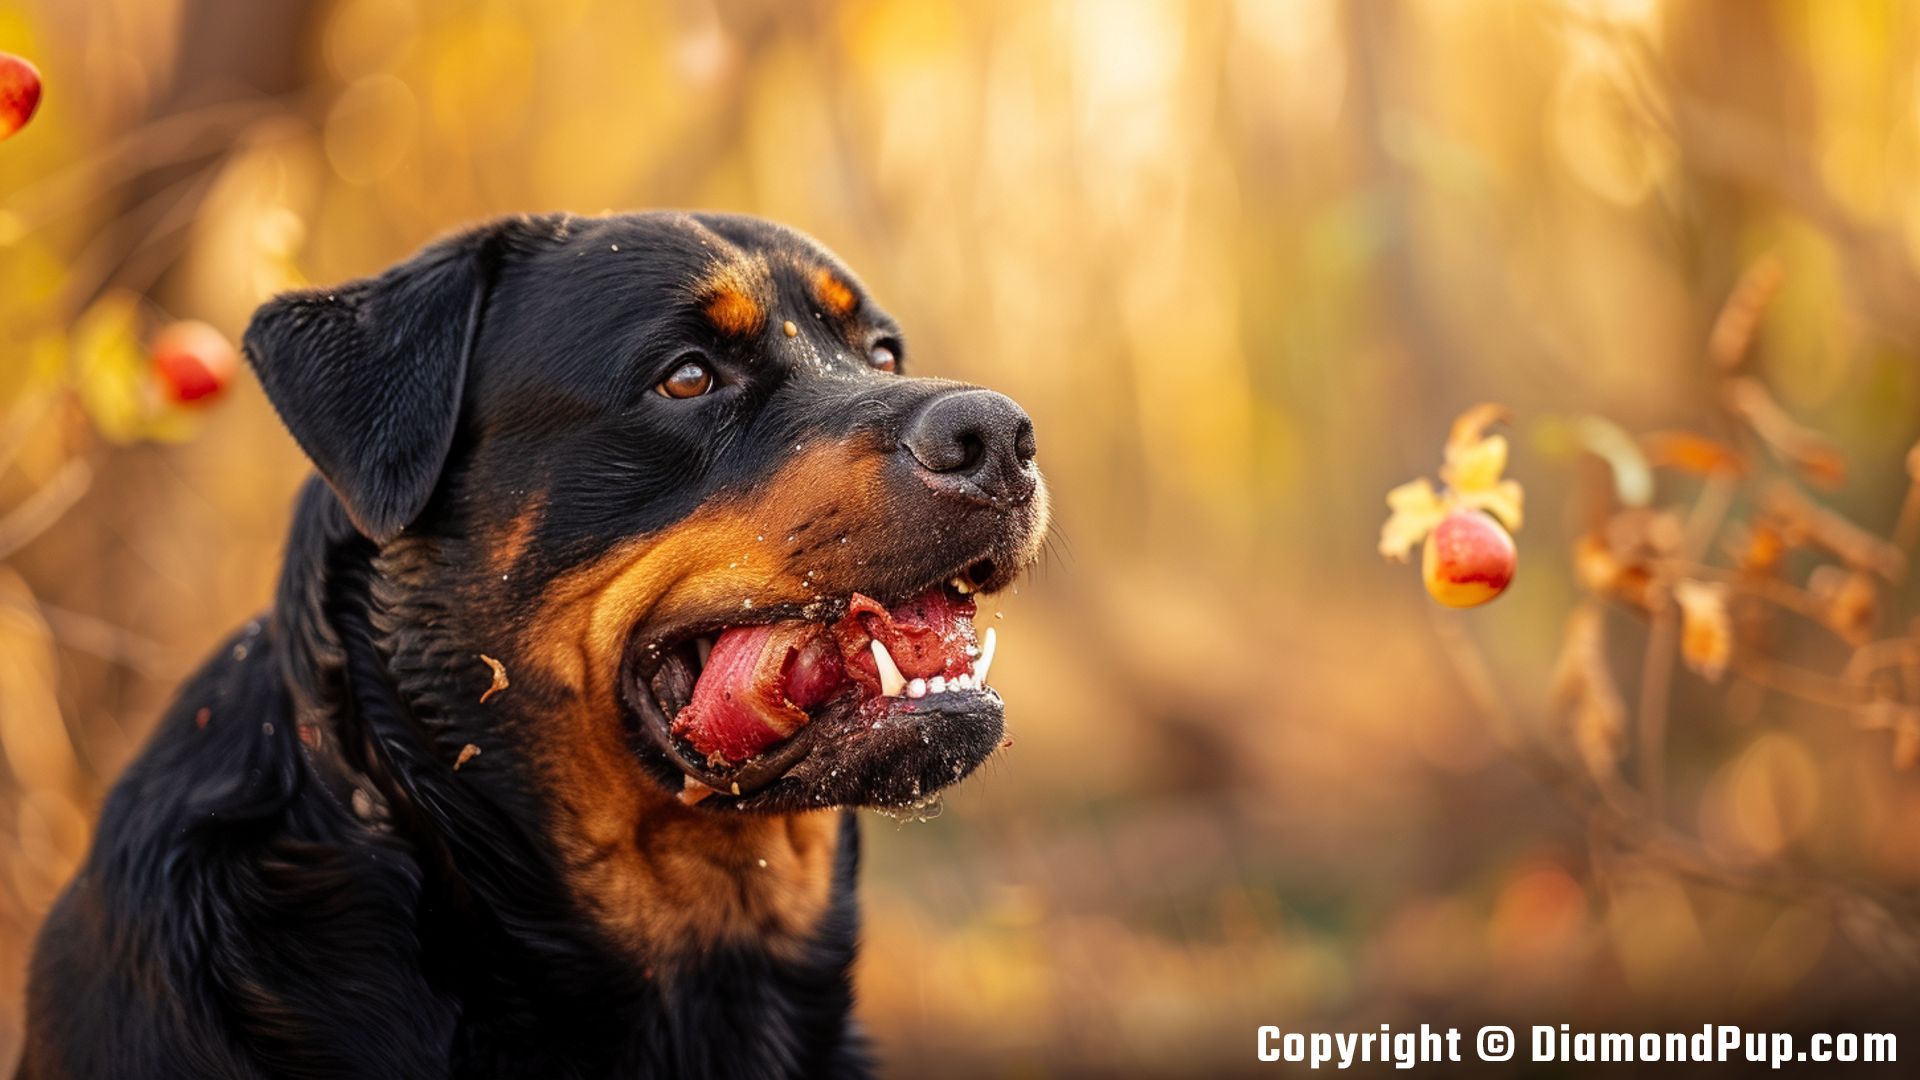 Photograph of a Happy Rottweiler Eating Bacon